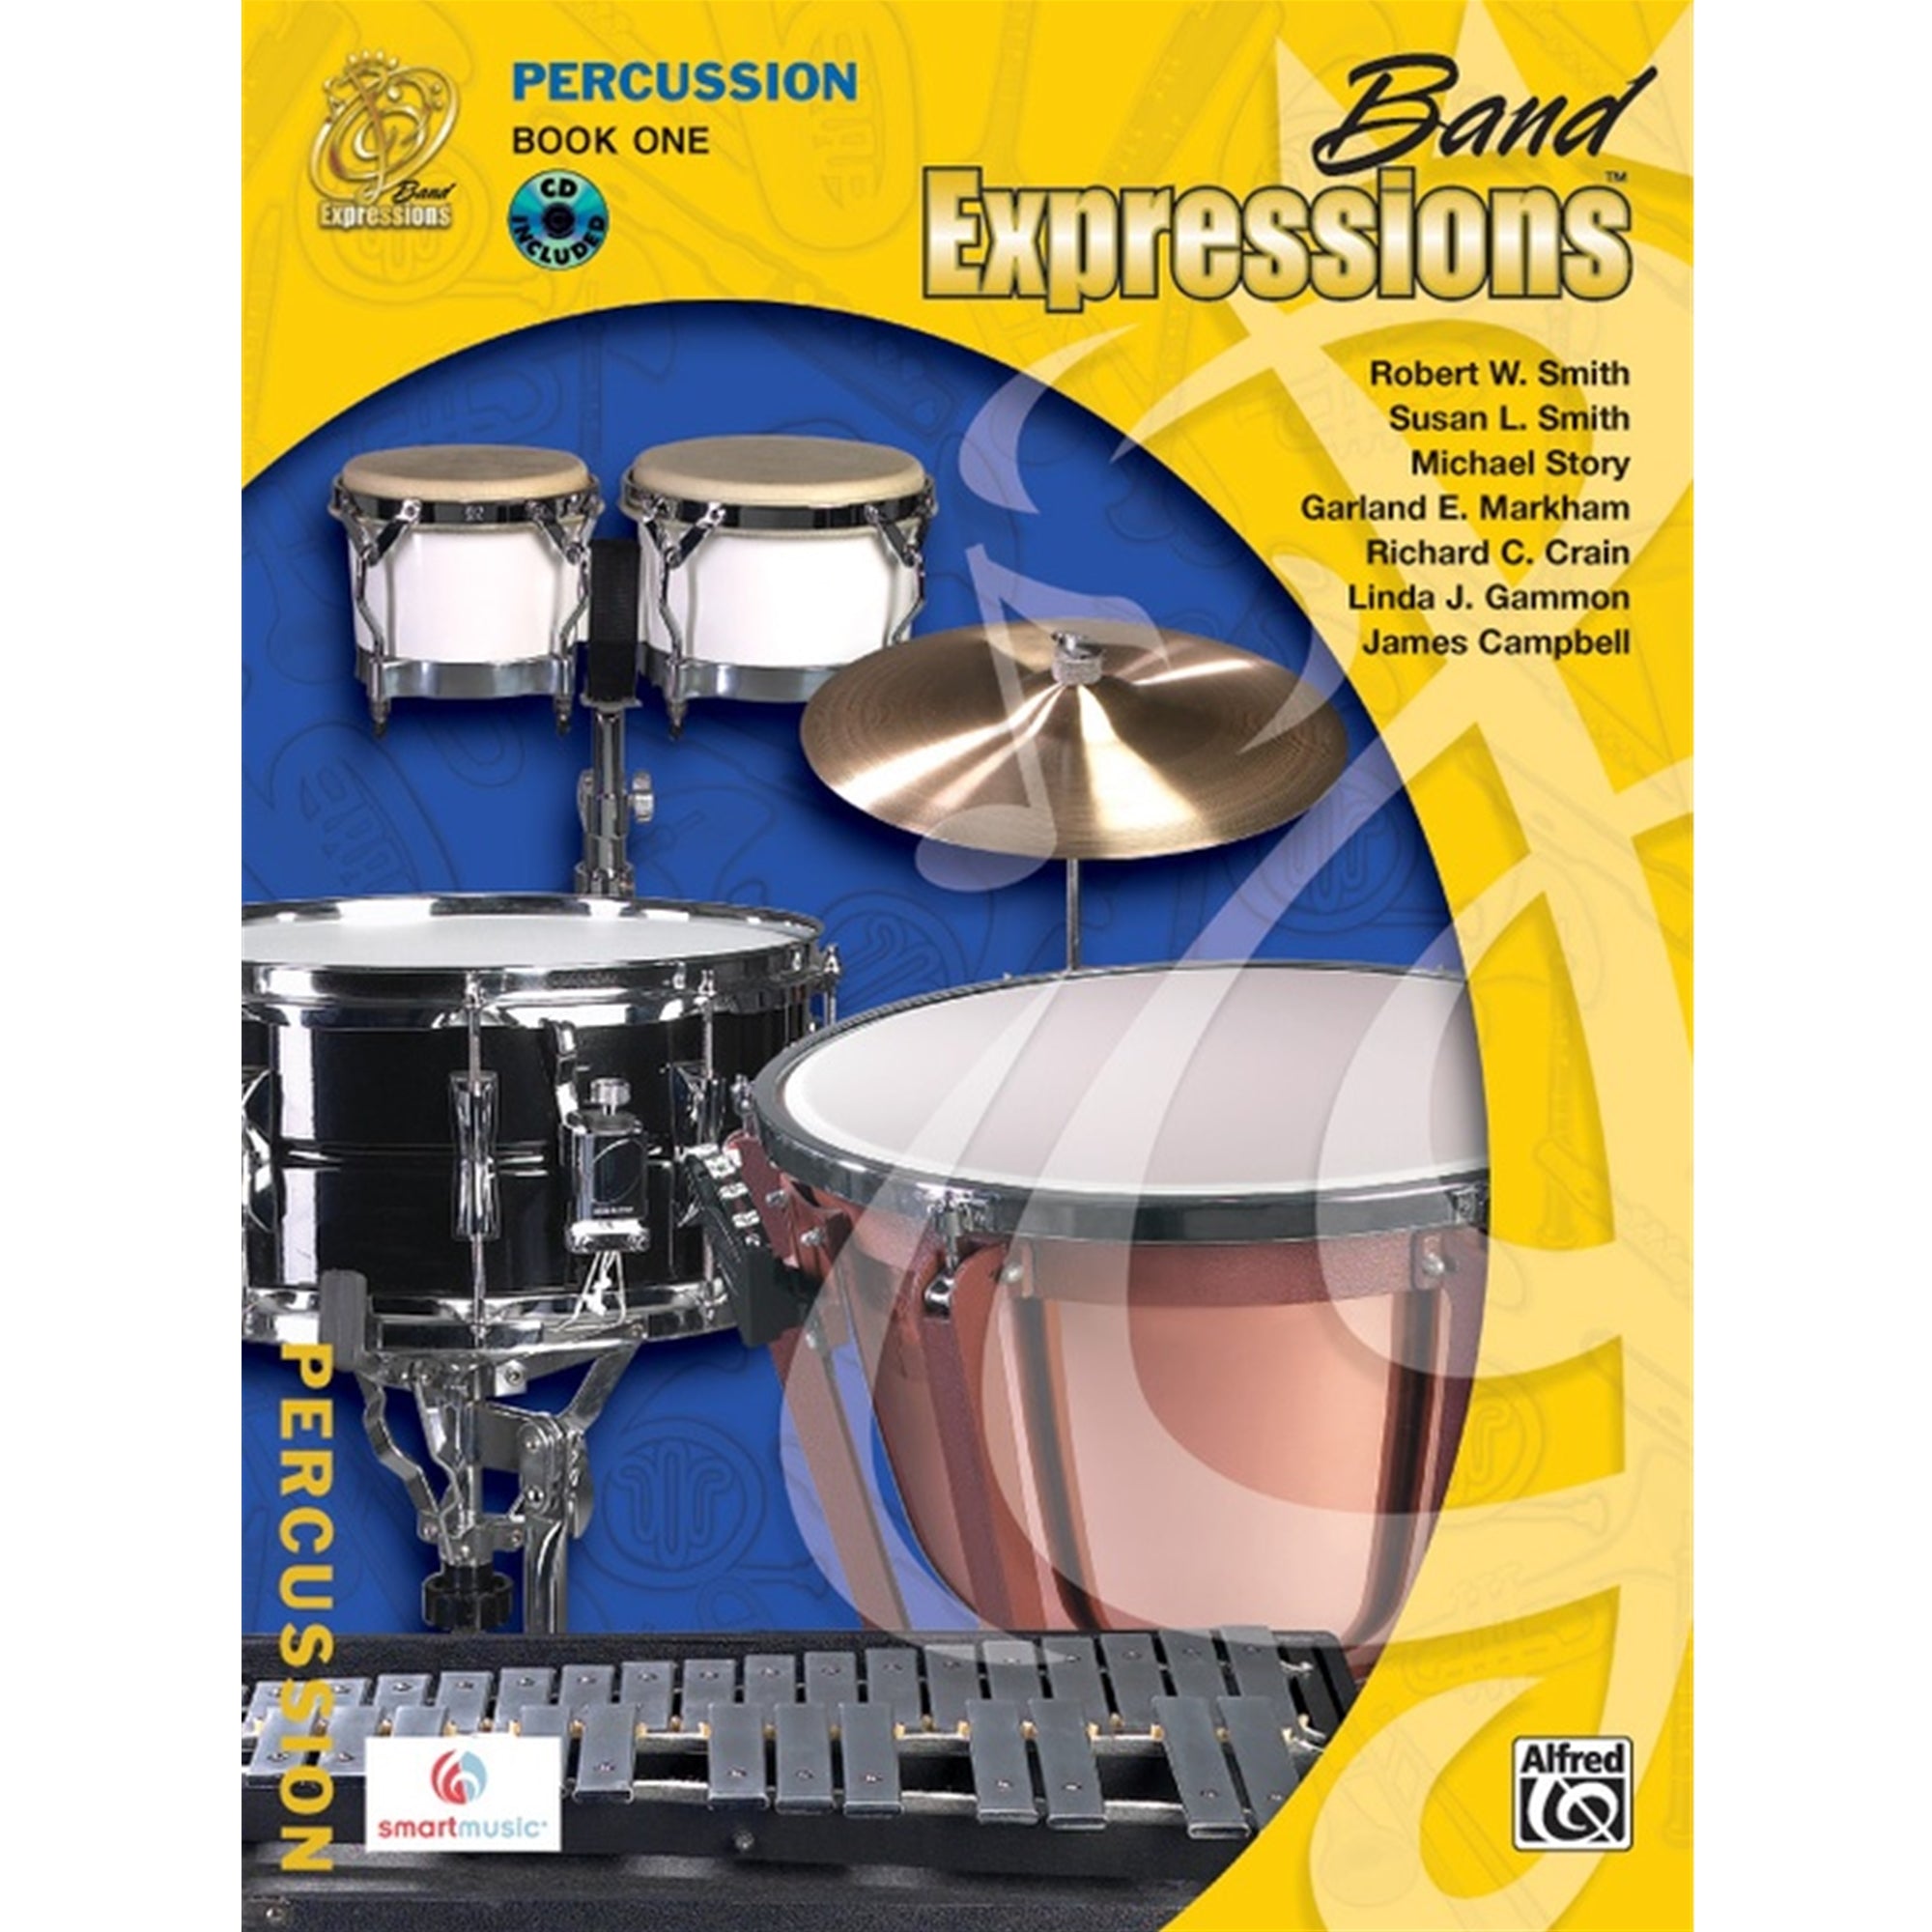 ALFRED 00MCB1016CDX Band Expressions , Book One: Student Edition [Percussion]